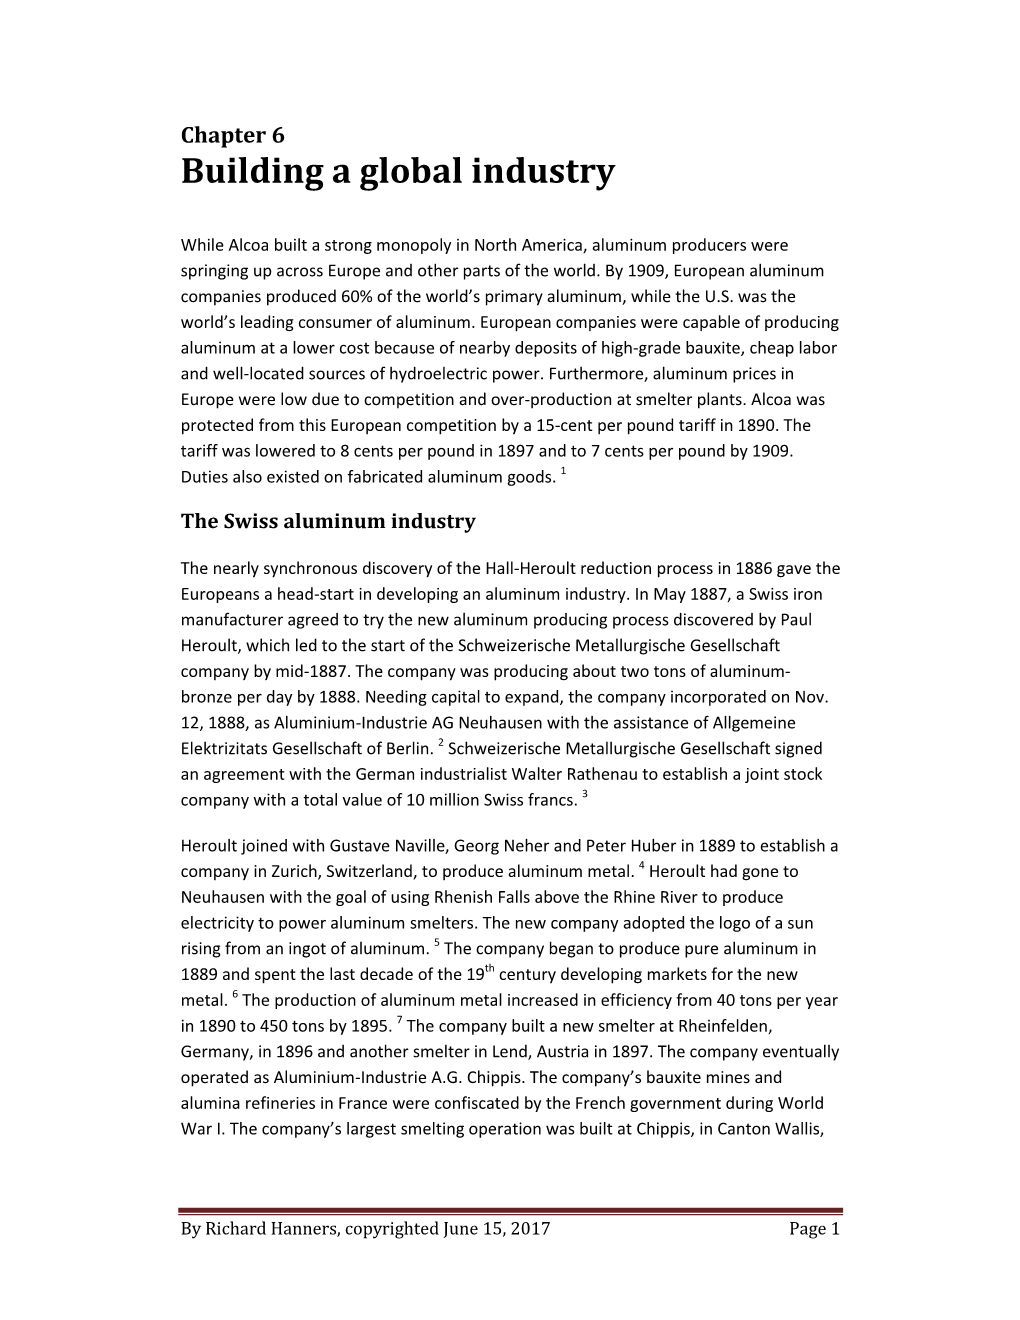 Building a Global Industry